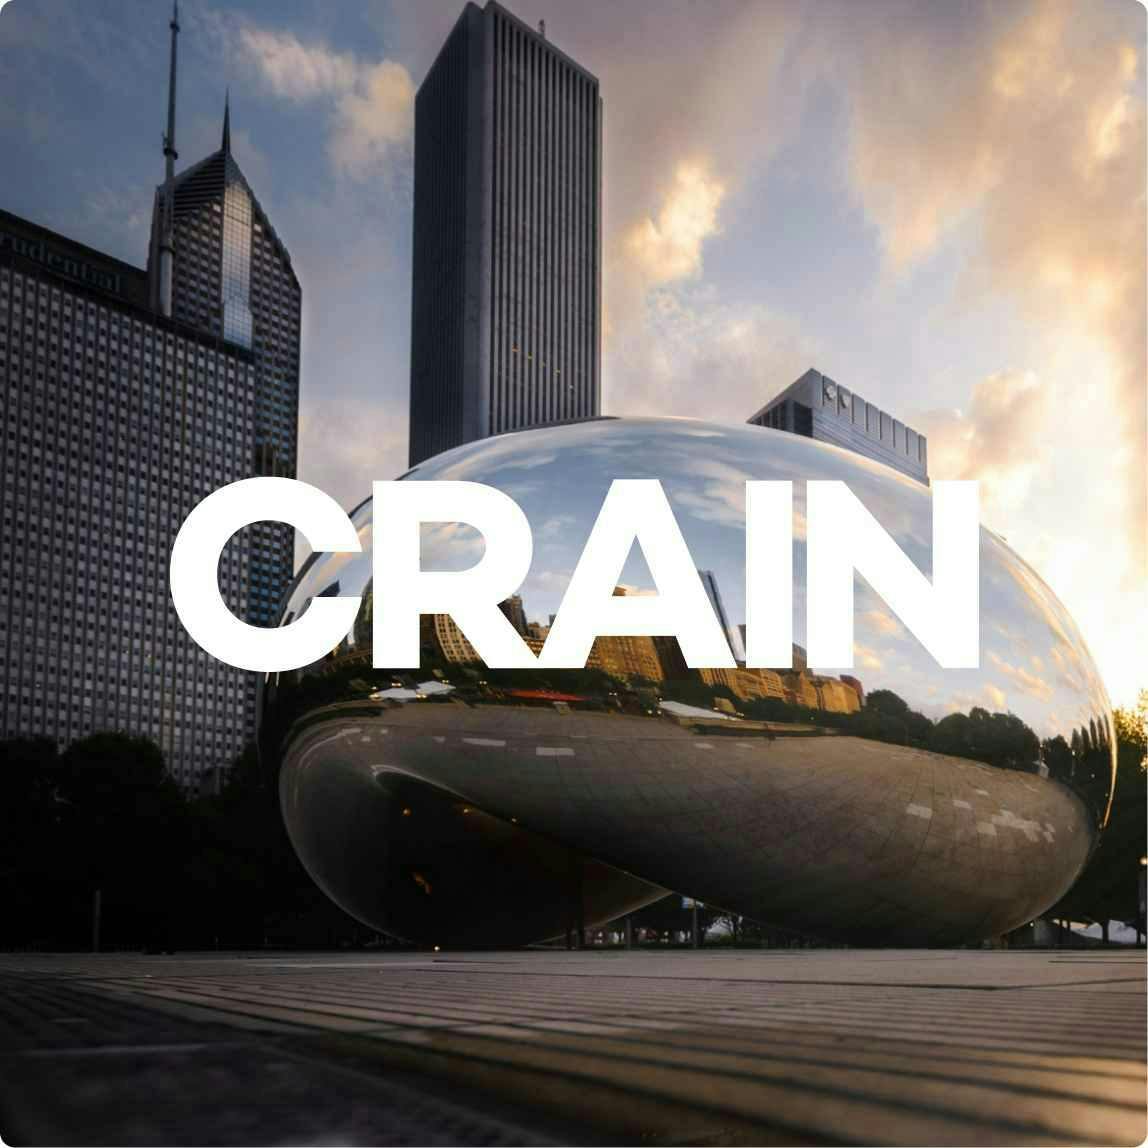 Picture of the Chicago Bean structure in twilight with the Crain logo on top